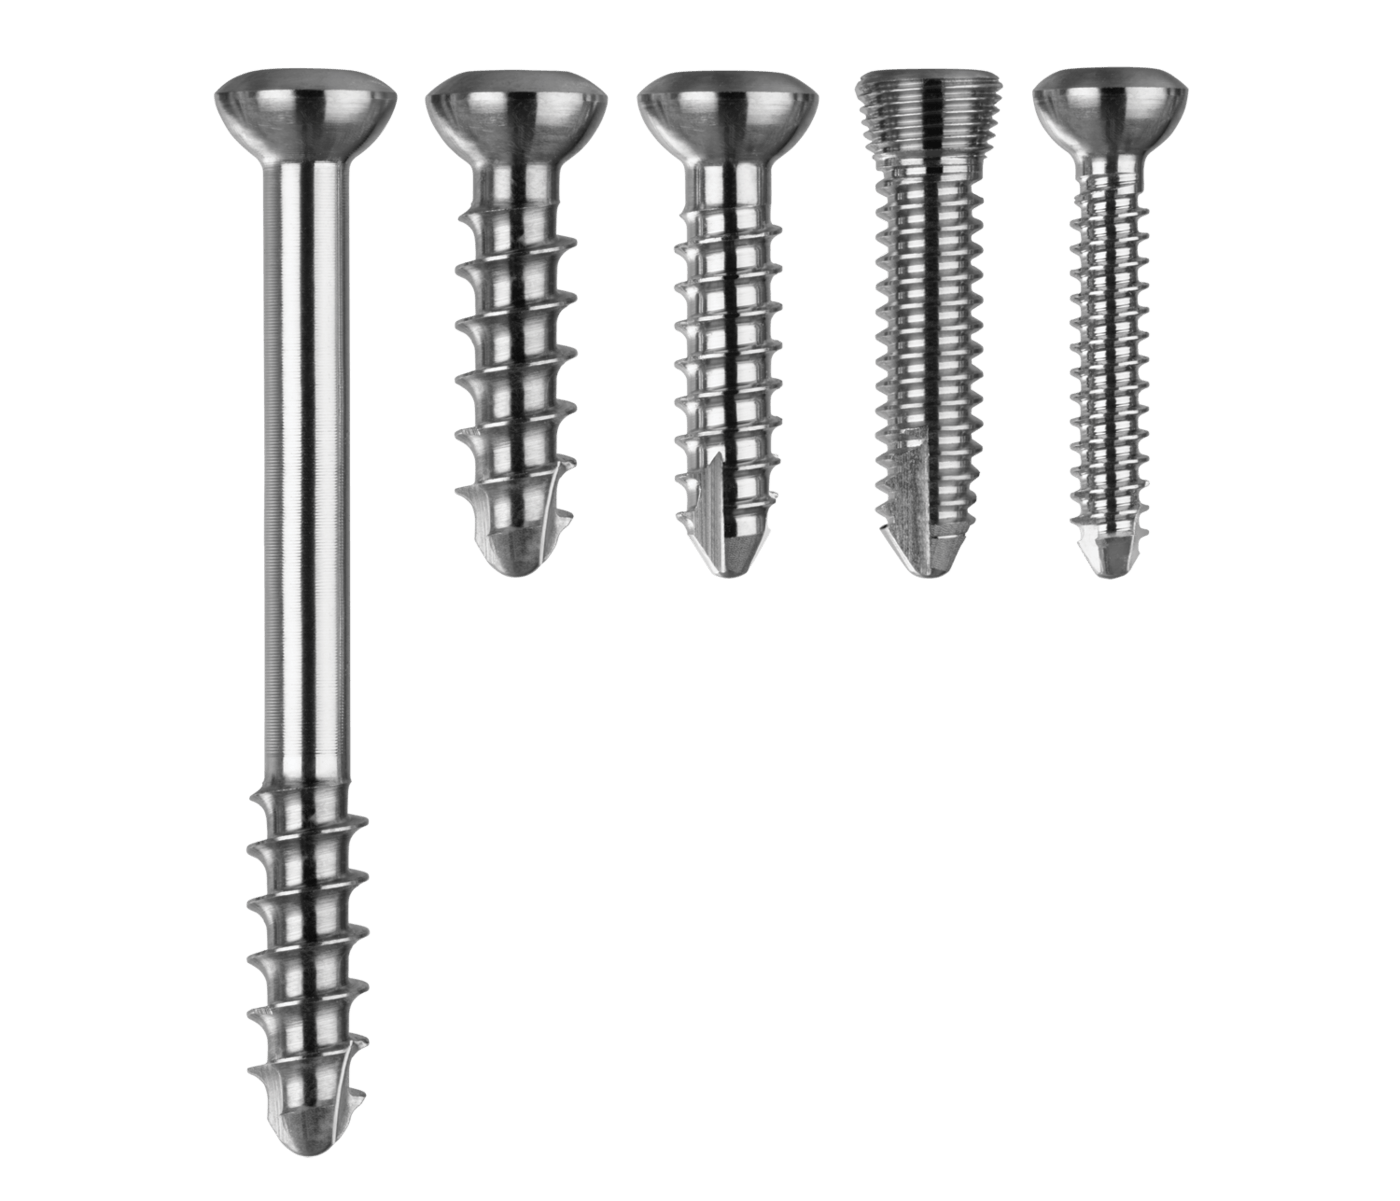 ANTHEM® Small Fragment Fracture System Screws